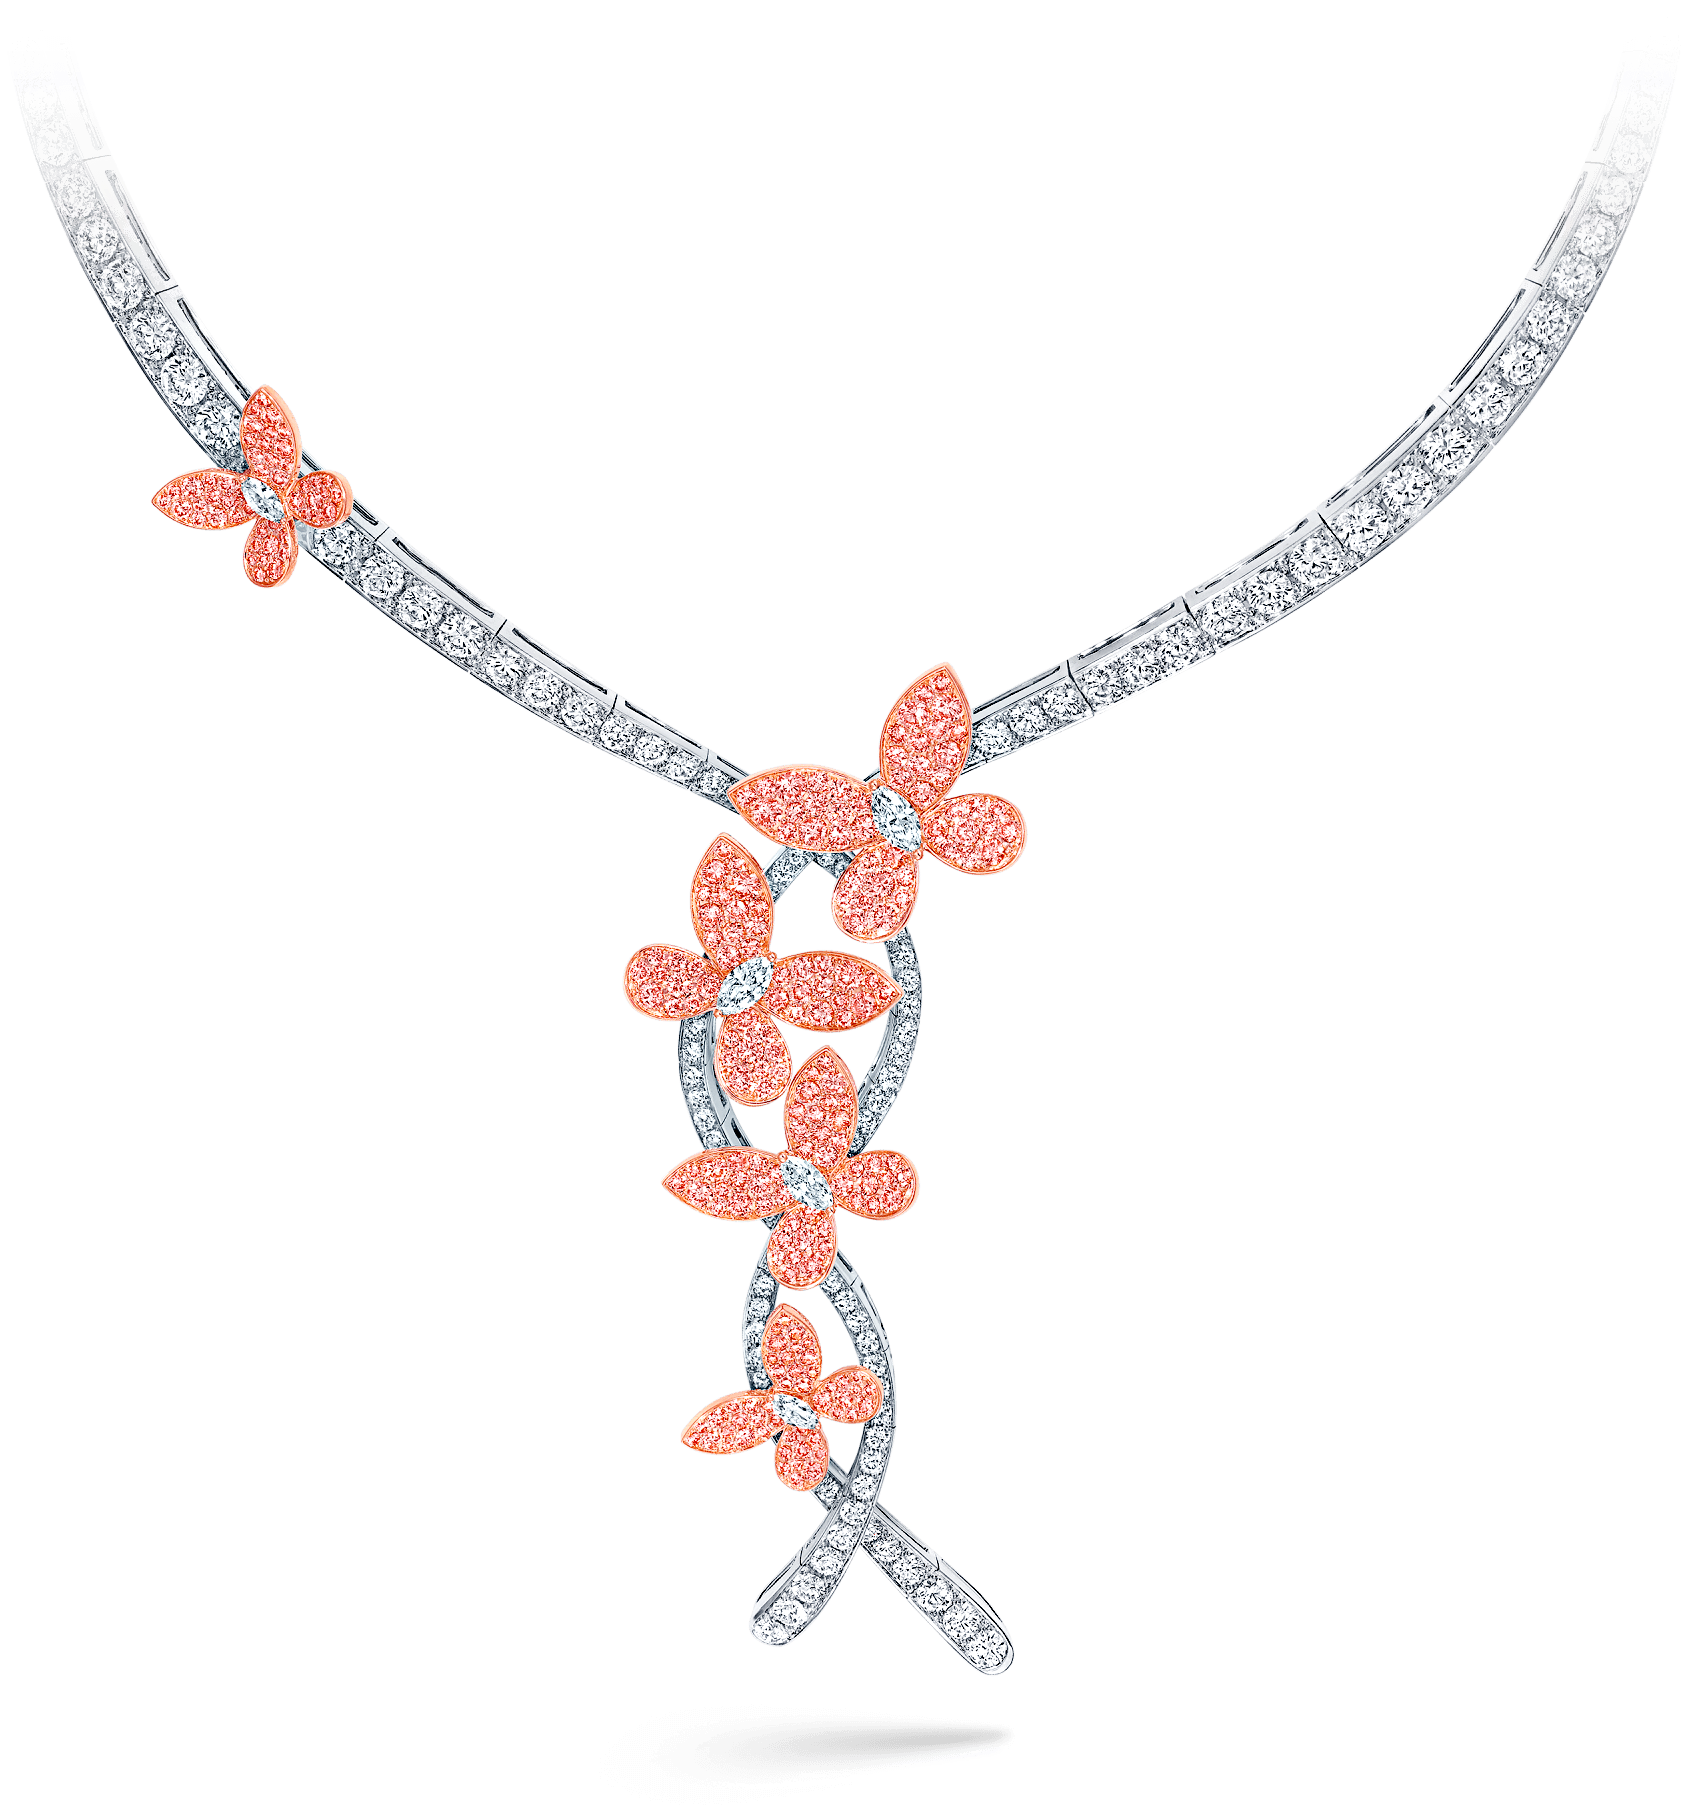 A Necklace With Flowers And Butterflies